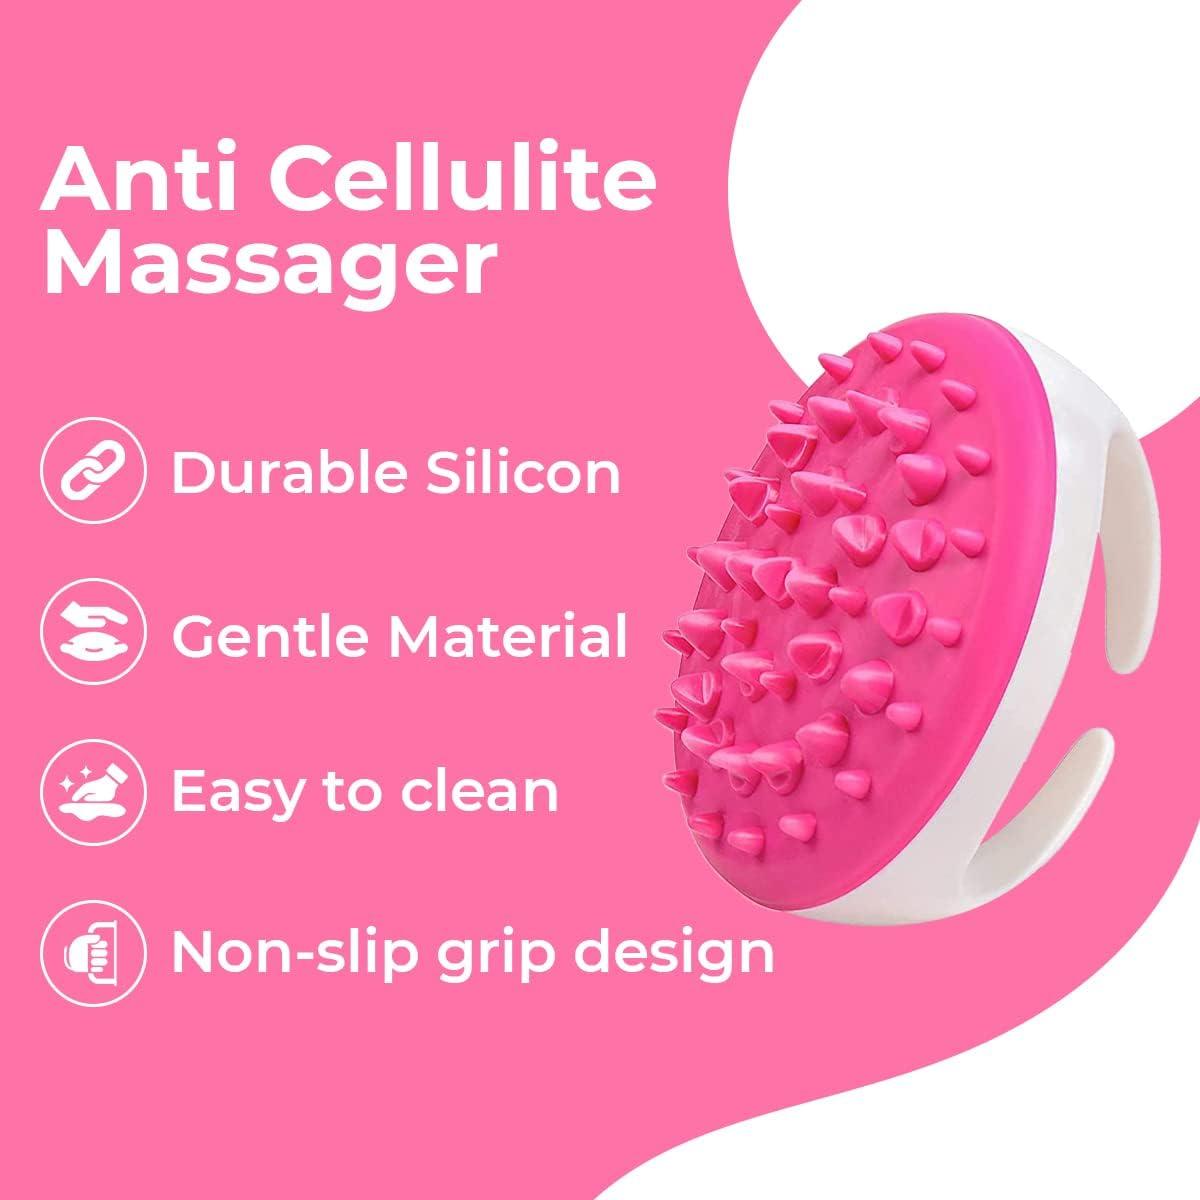 Avalon Anti Cellulite Massager Silicone Body Brush & Cellulite Remover  Silicone Exfoliating Body Brush & Body Scrubber Improves Fat Deposits  Shower Massage Scrubber Use with Cream or Oil - Pink Pink Massager